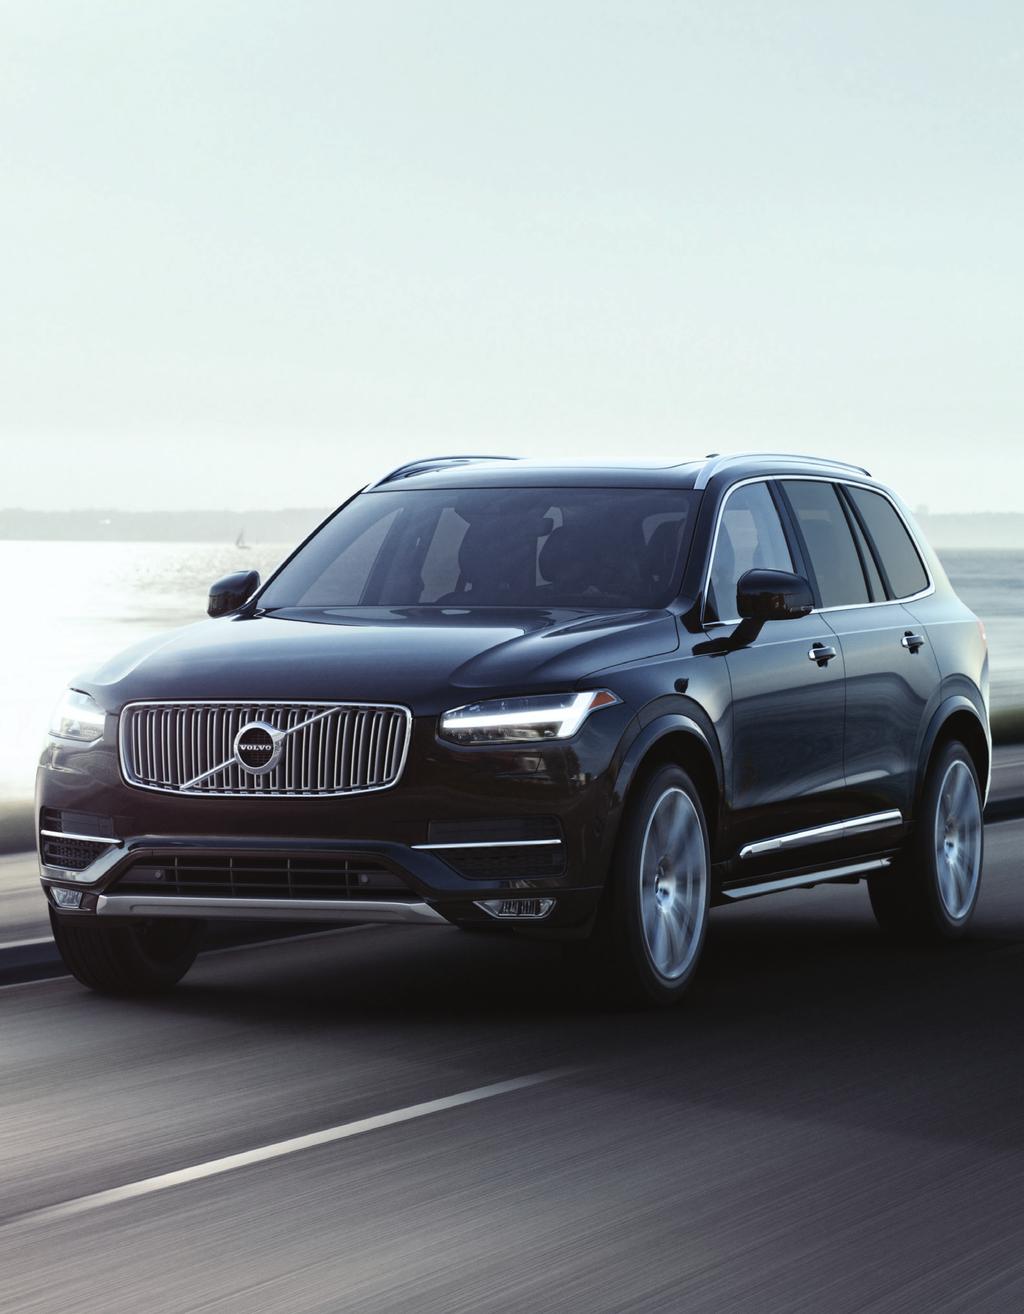 BENEFITS 3 THE BENEFITS OF A CERTIFIED BY VOLVO VEHICLE 1. 5-year, unlimited mile warranty, upgradeable up to 10 years 1 2.